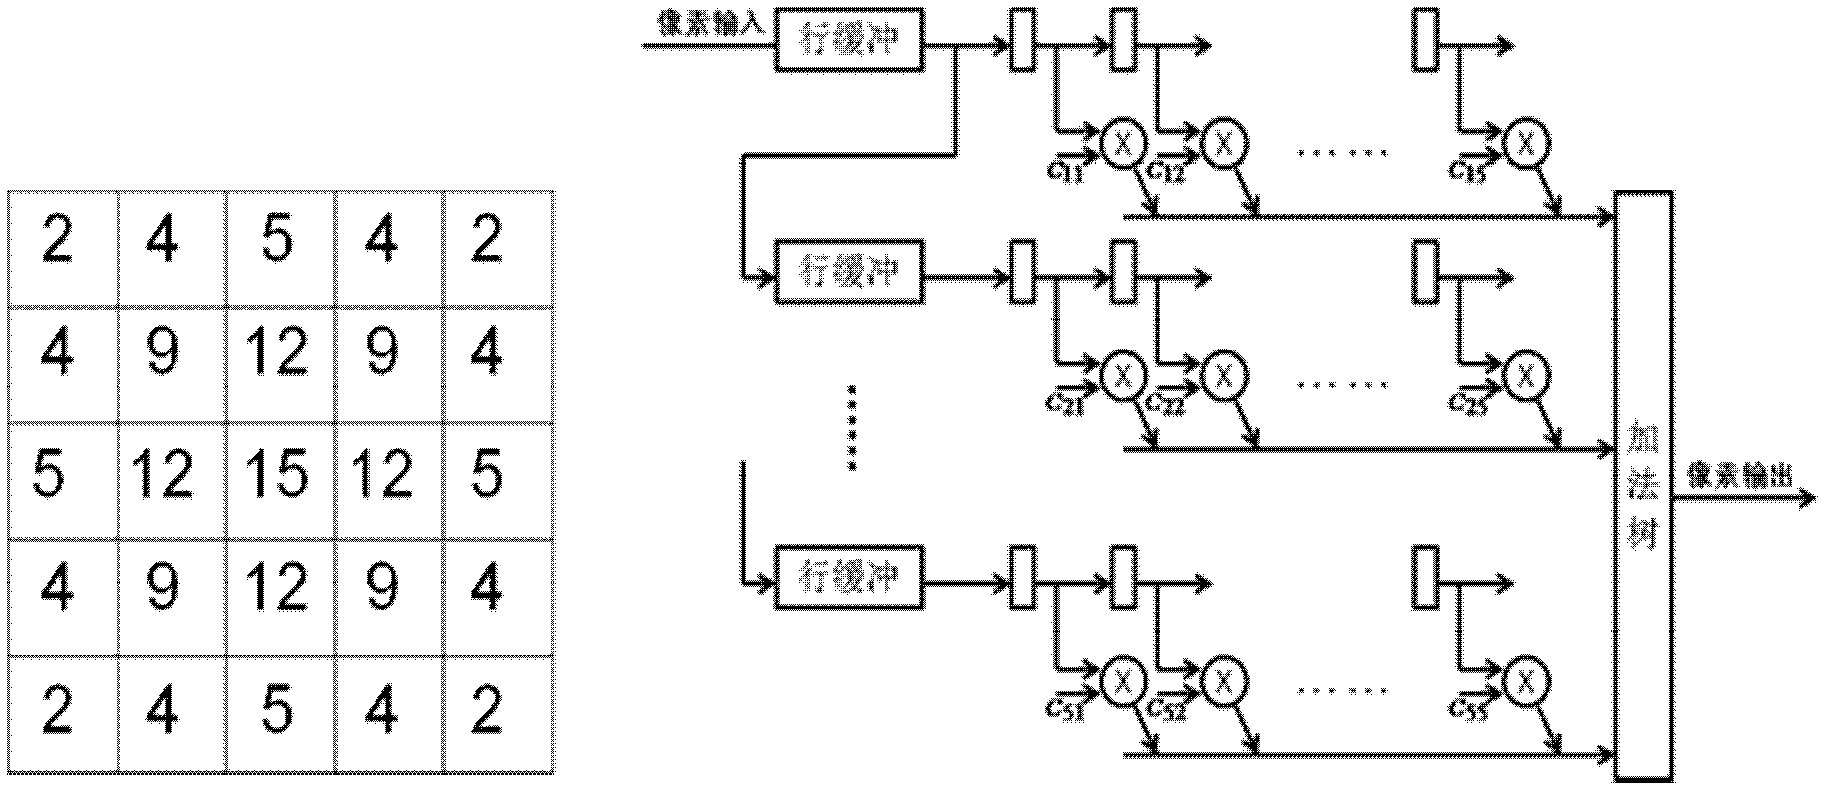 Image acquiring and processing method based on FPGA (field programmable gate array) serving as control core